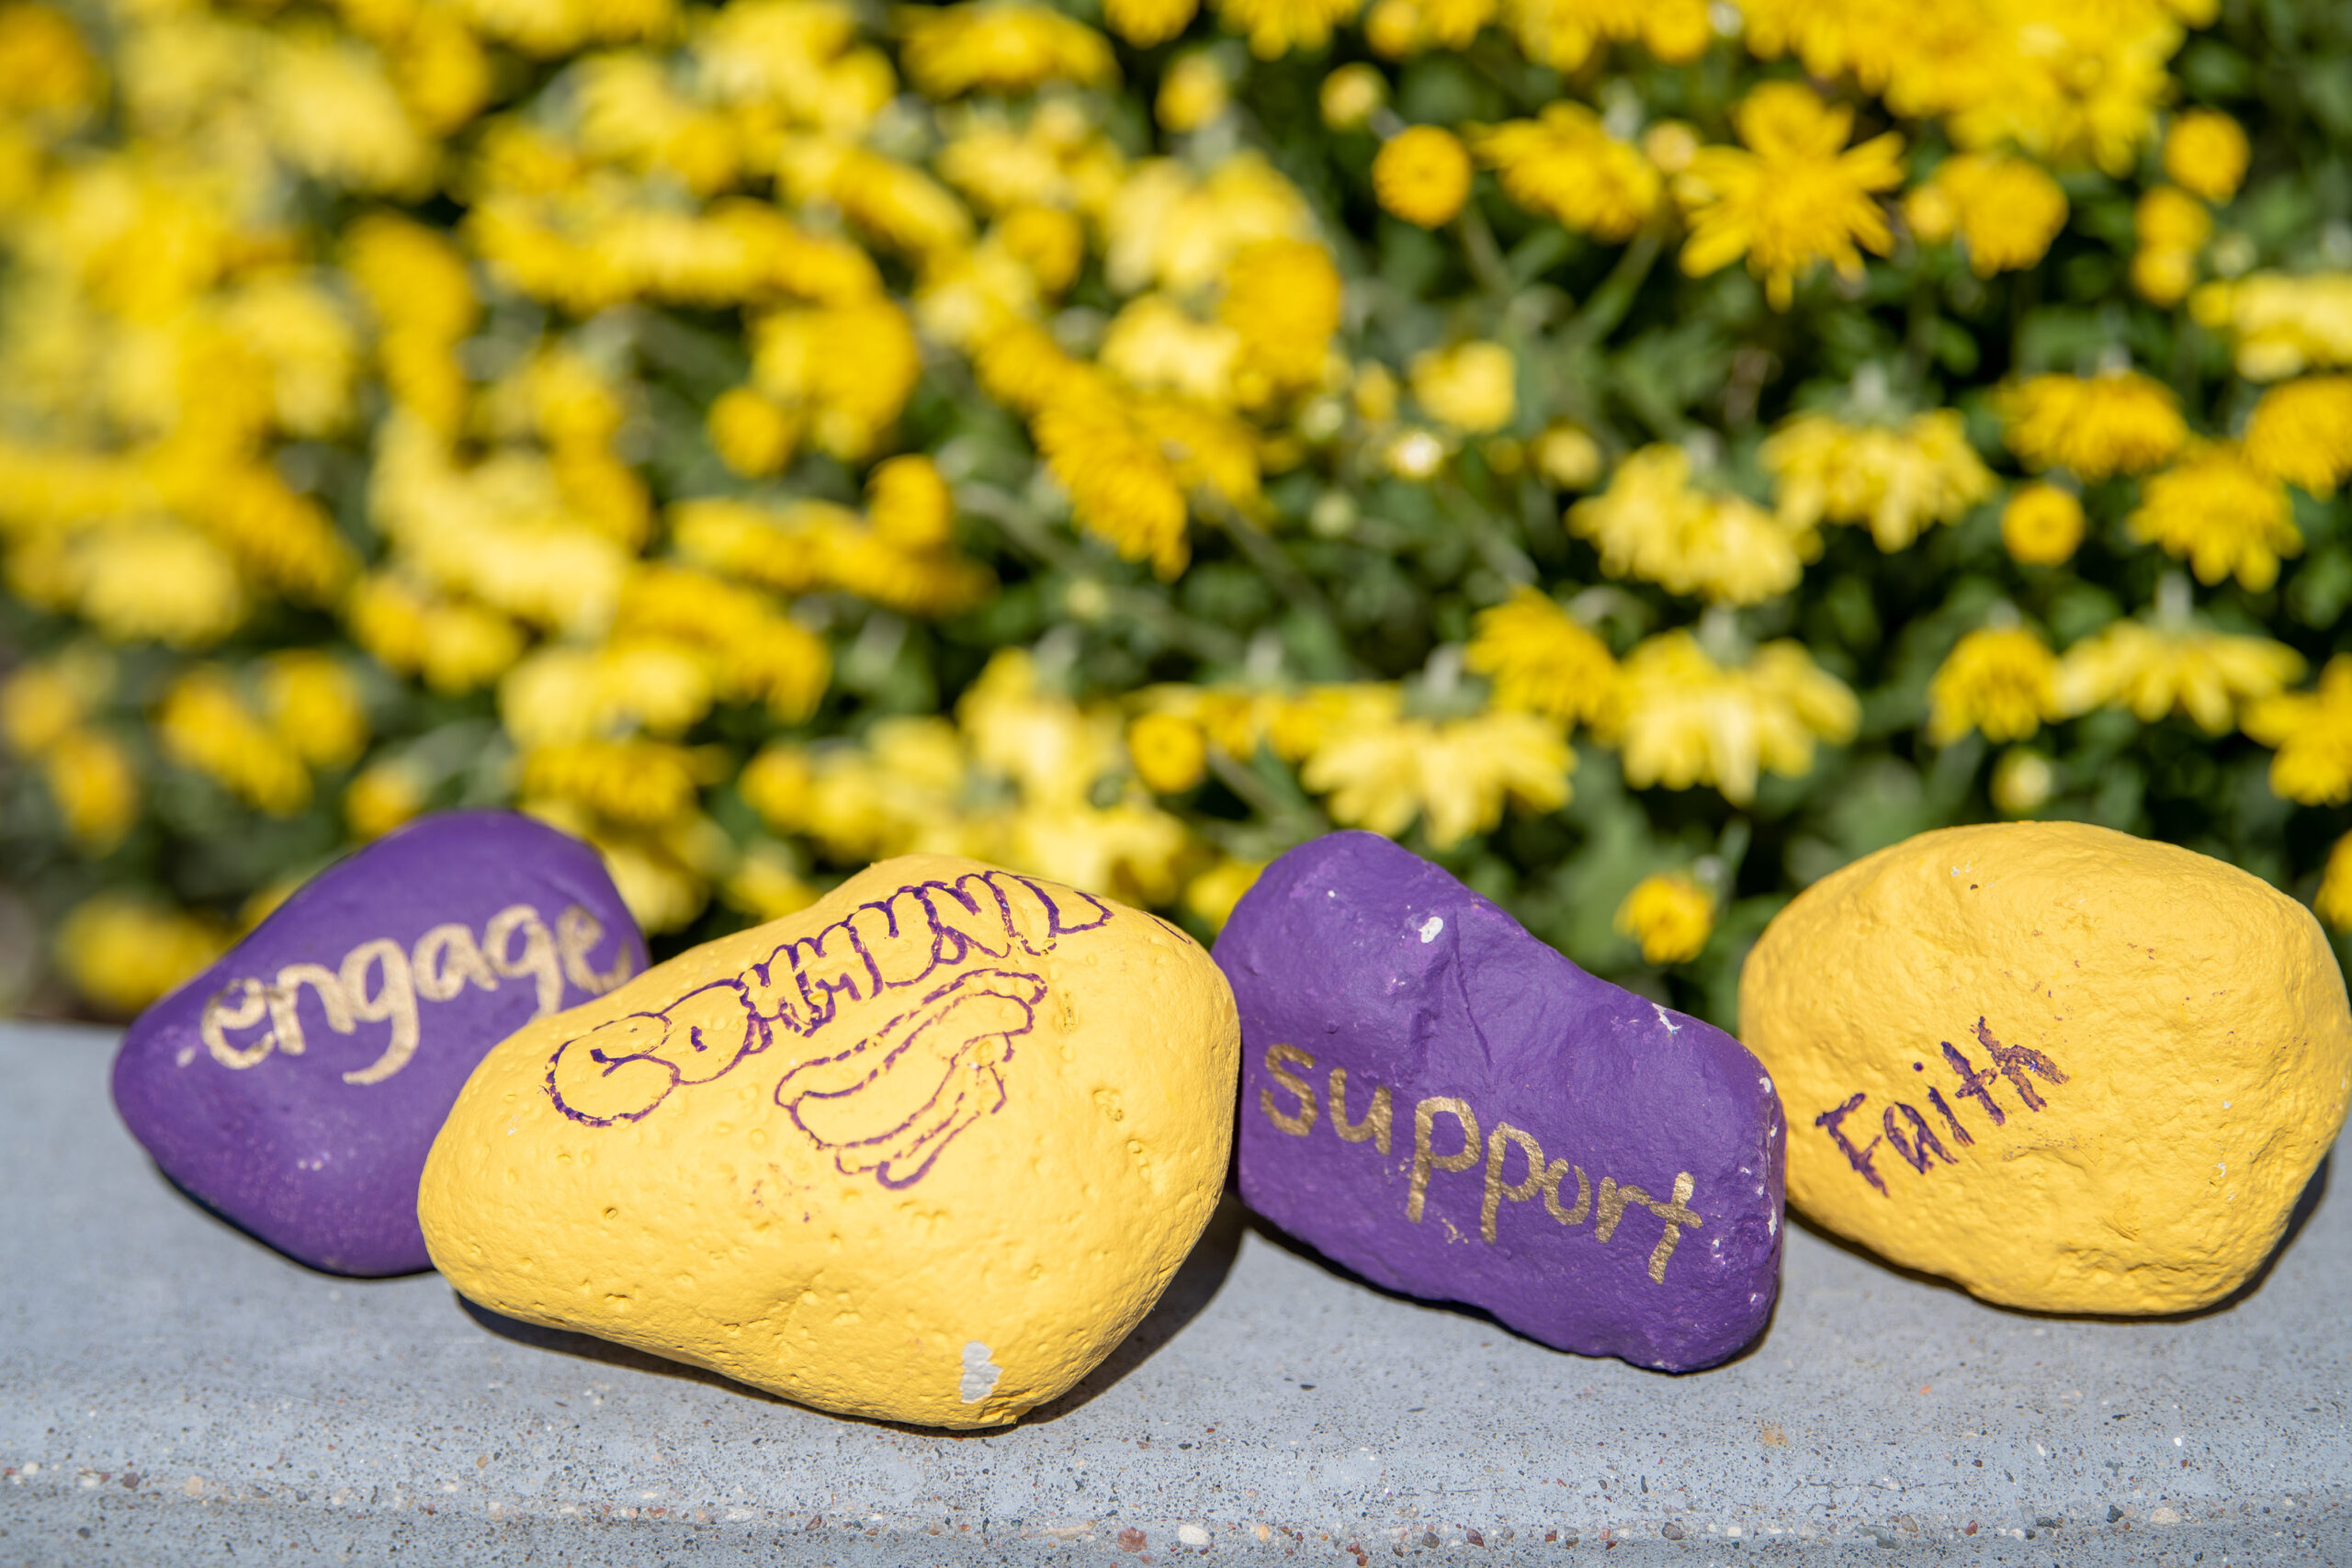 Purple and gold rocks with engage, community, support, and family written on them.